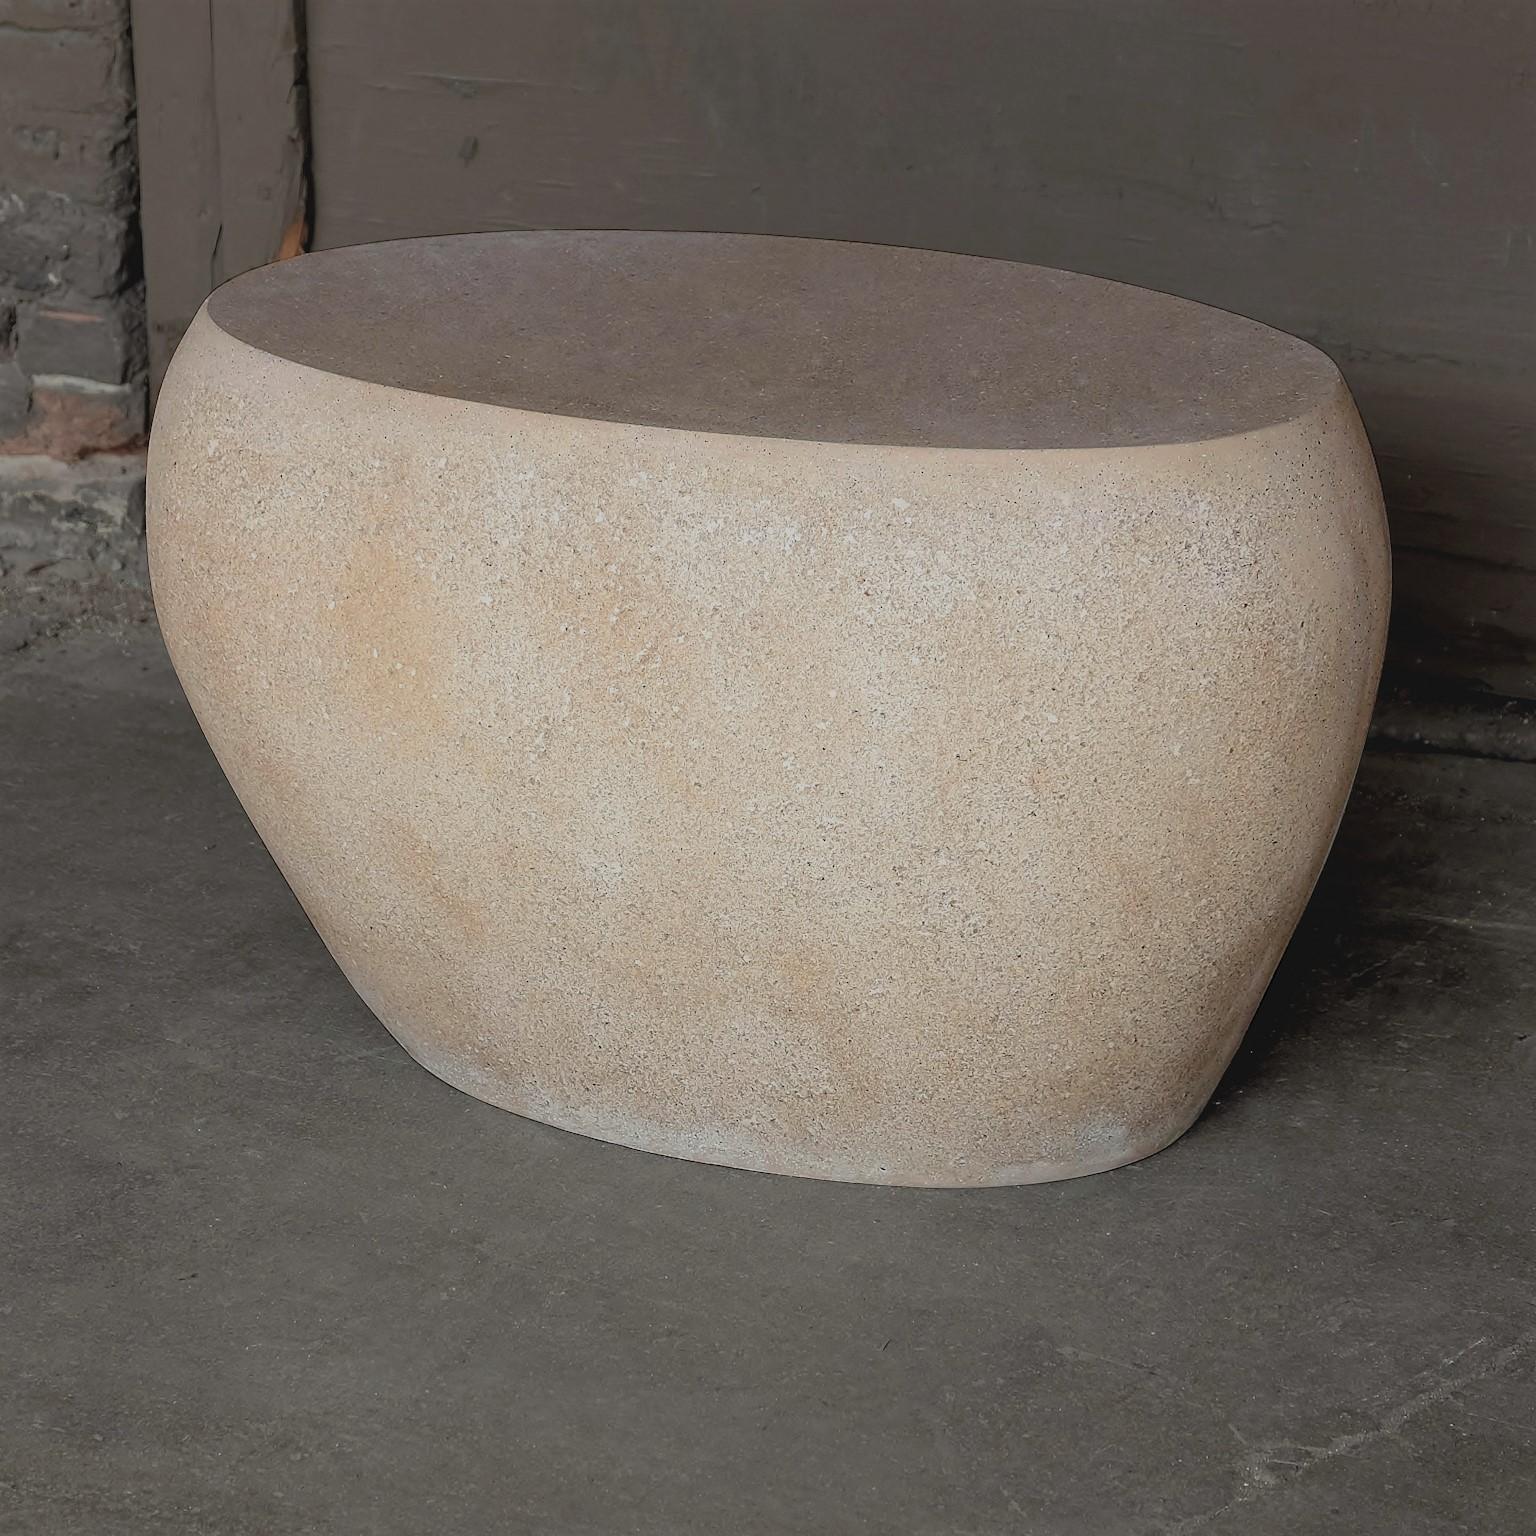 Smoothed over a millennia, the River Rock’s organic silhouette creates a soft flow of stone across its hand-cast surface, providing visual and tactile delicacy.

Dimensions: Width 26 in. (66 cm), depth 14 in. (36 cm), height 18 in. (46 cm). Weight